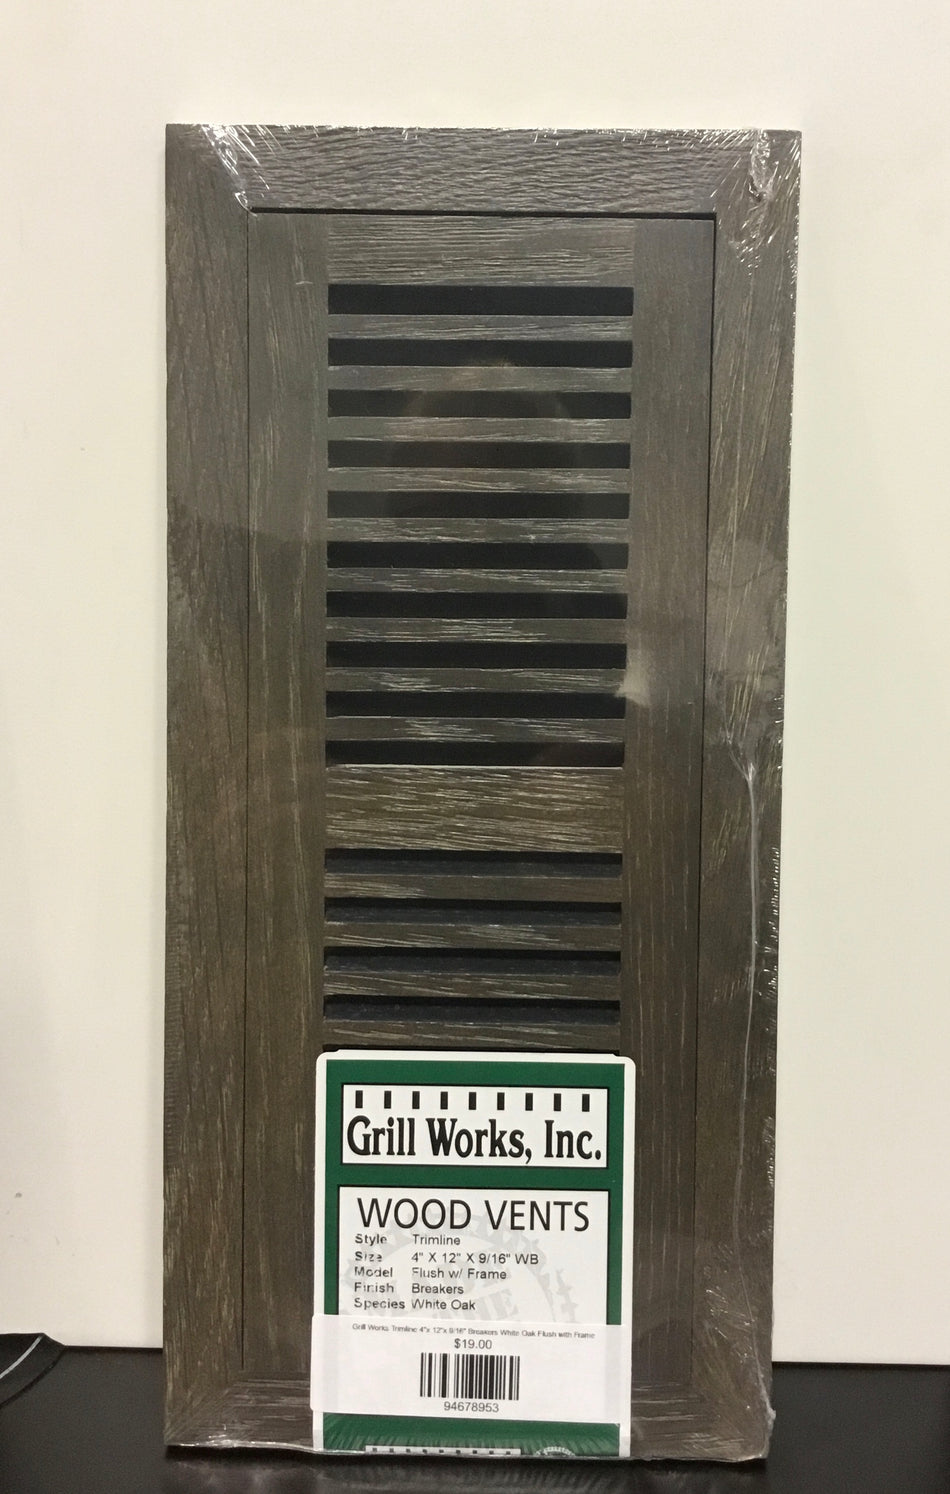 Grill Works Trimline 4"x 12"x 9/16" Breakers White Oak Flush with Frame